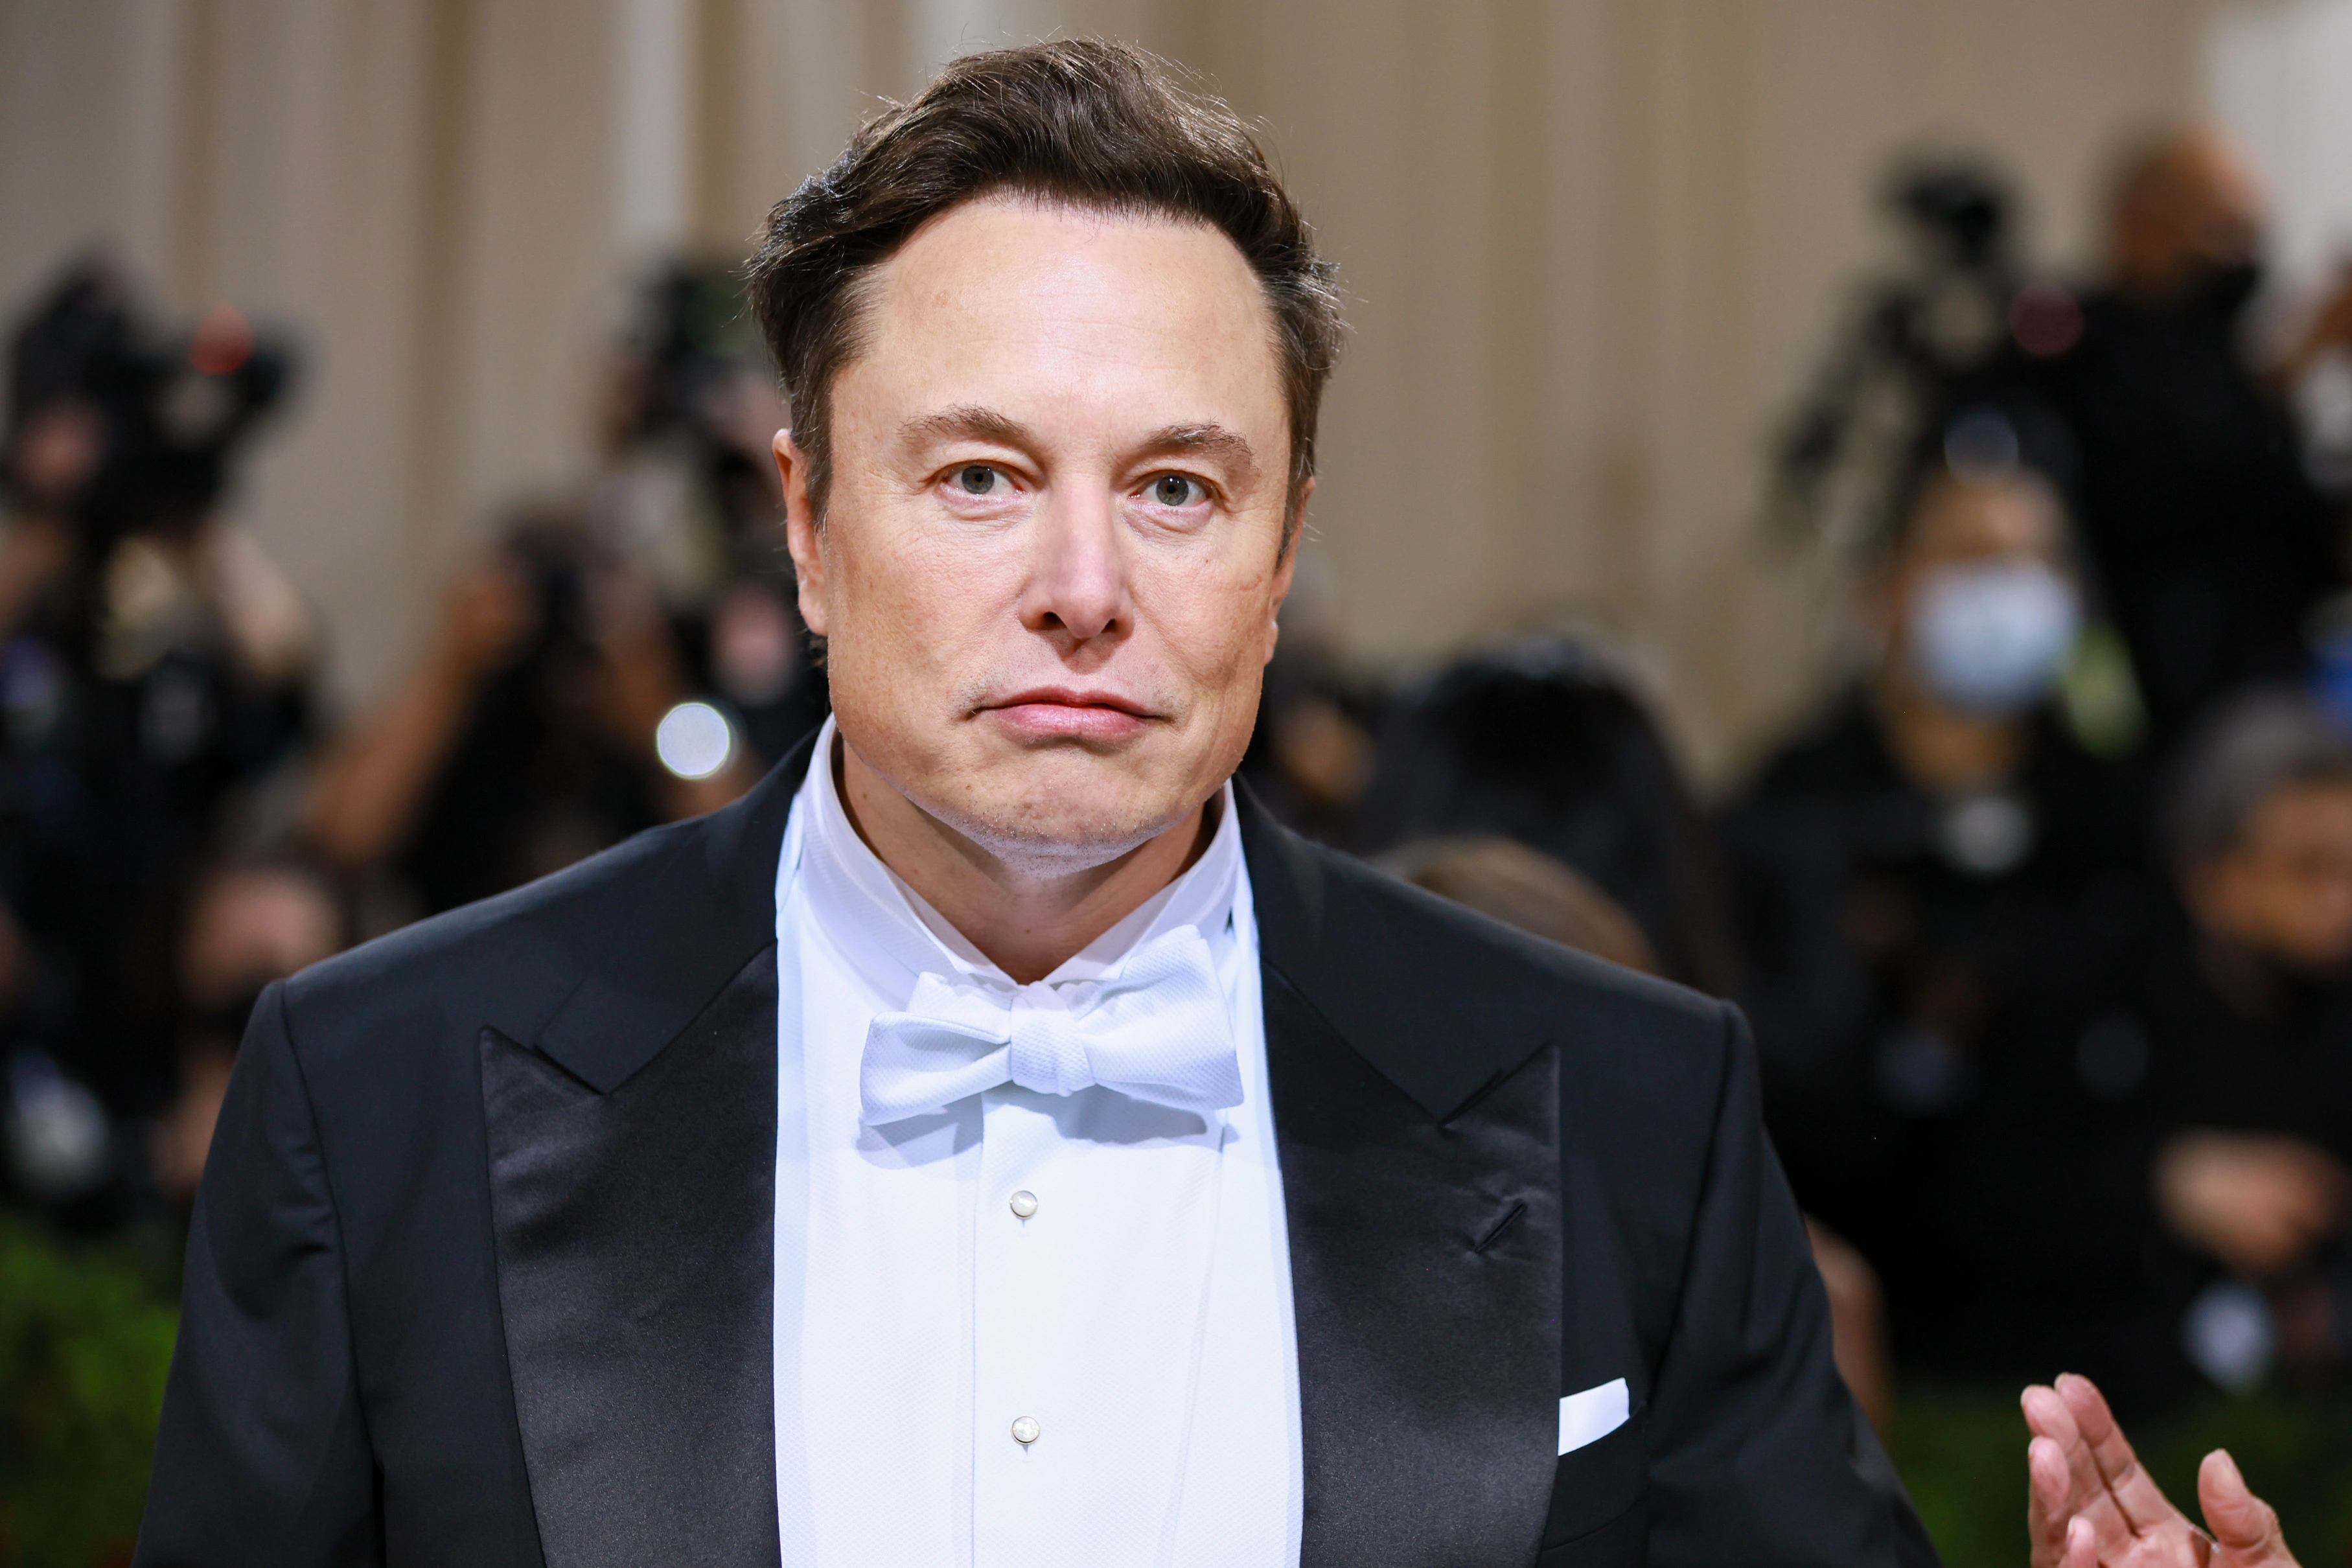 Elon musk affair rumours with his friend wife